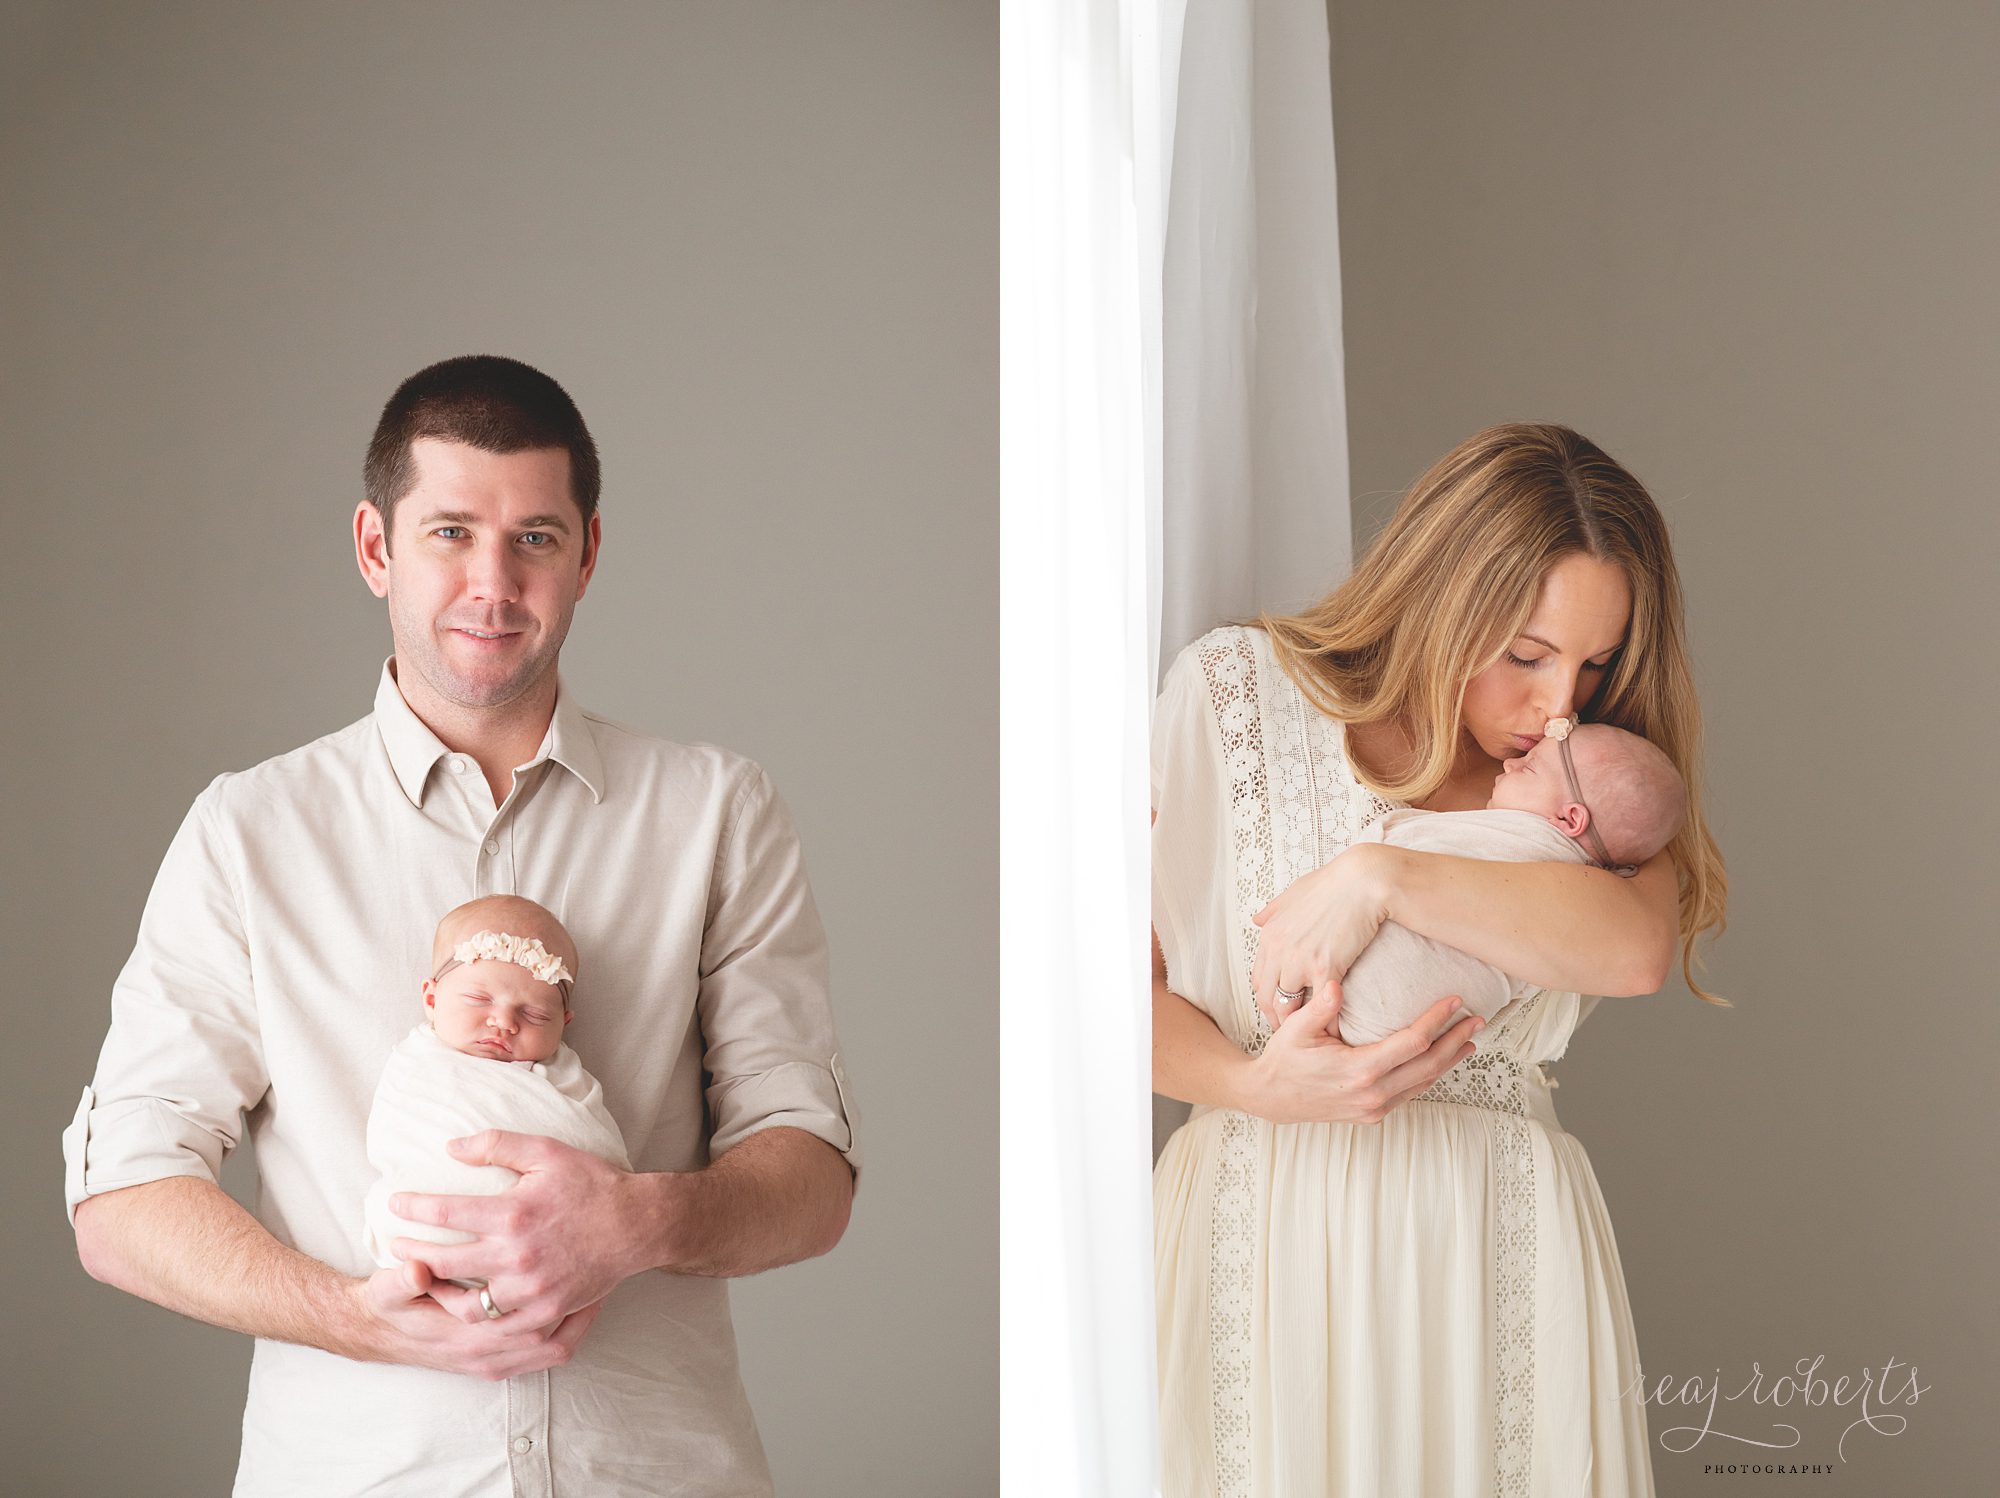 Chandler newborn photographer baby with parents | Reaj Roberts Photography